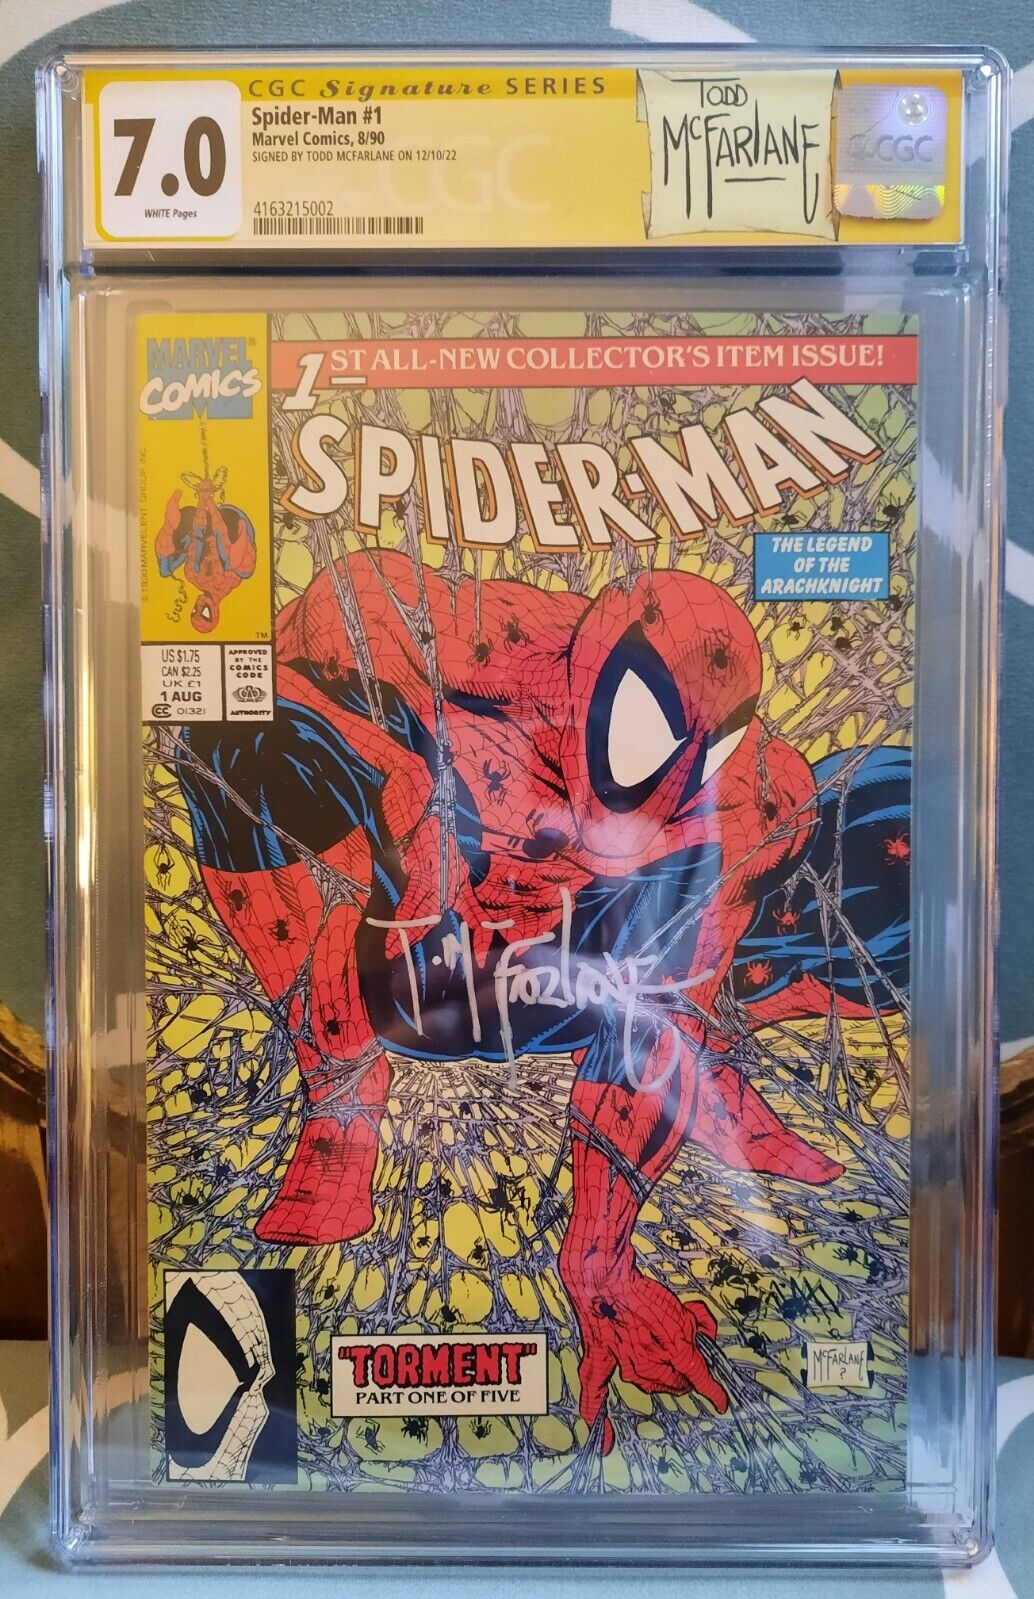 *Spider-Man #1 Green Polybag Variant 8/90 CGC SS 7.0 Signed By Todd McFarlane*